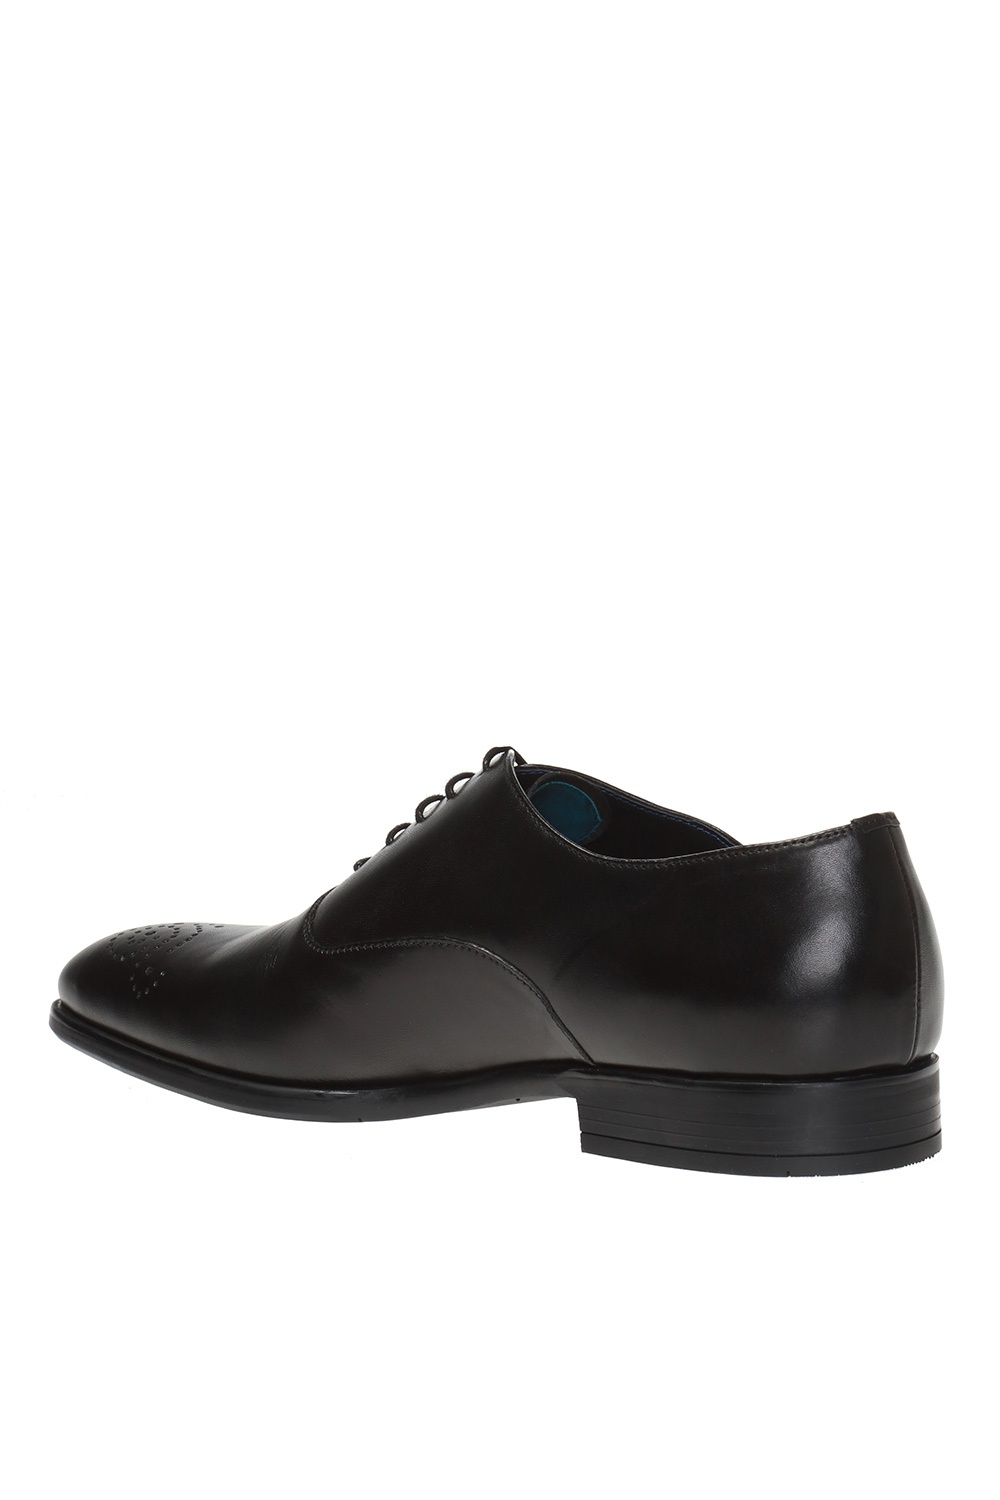 paul smith oxford shoes